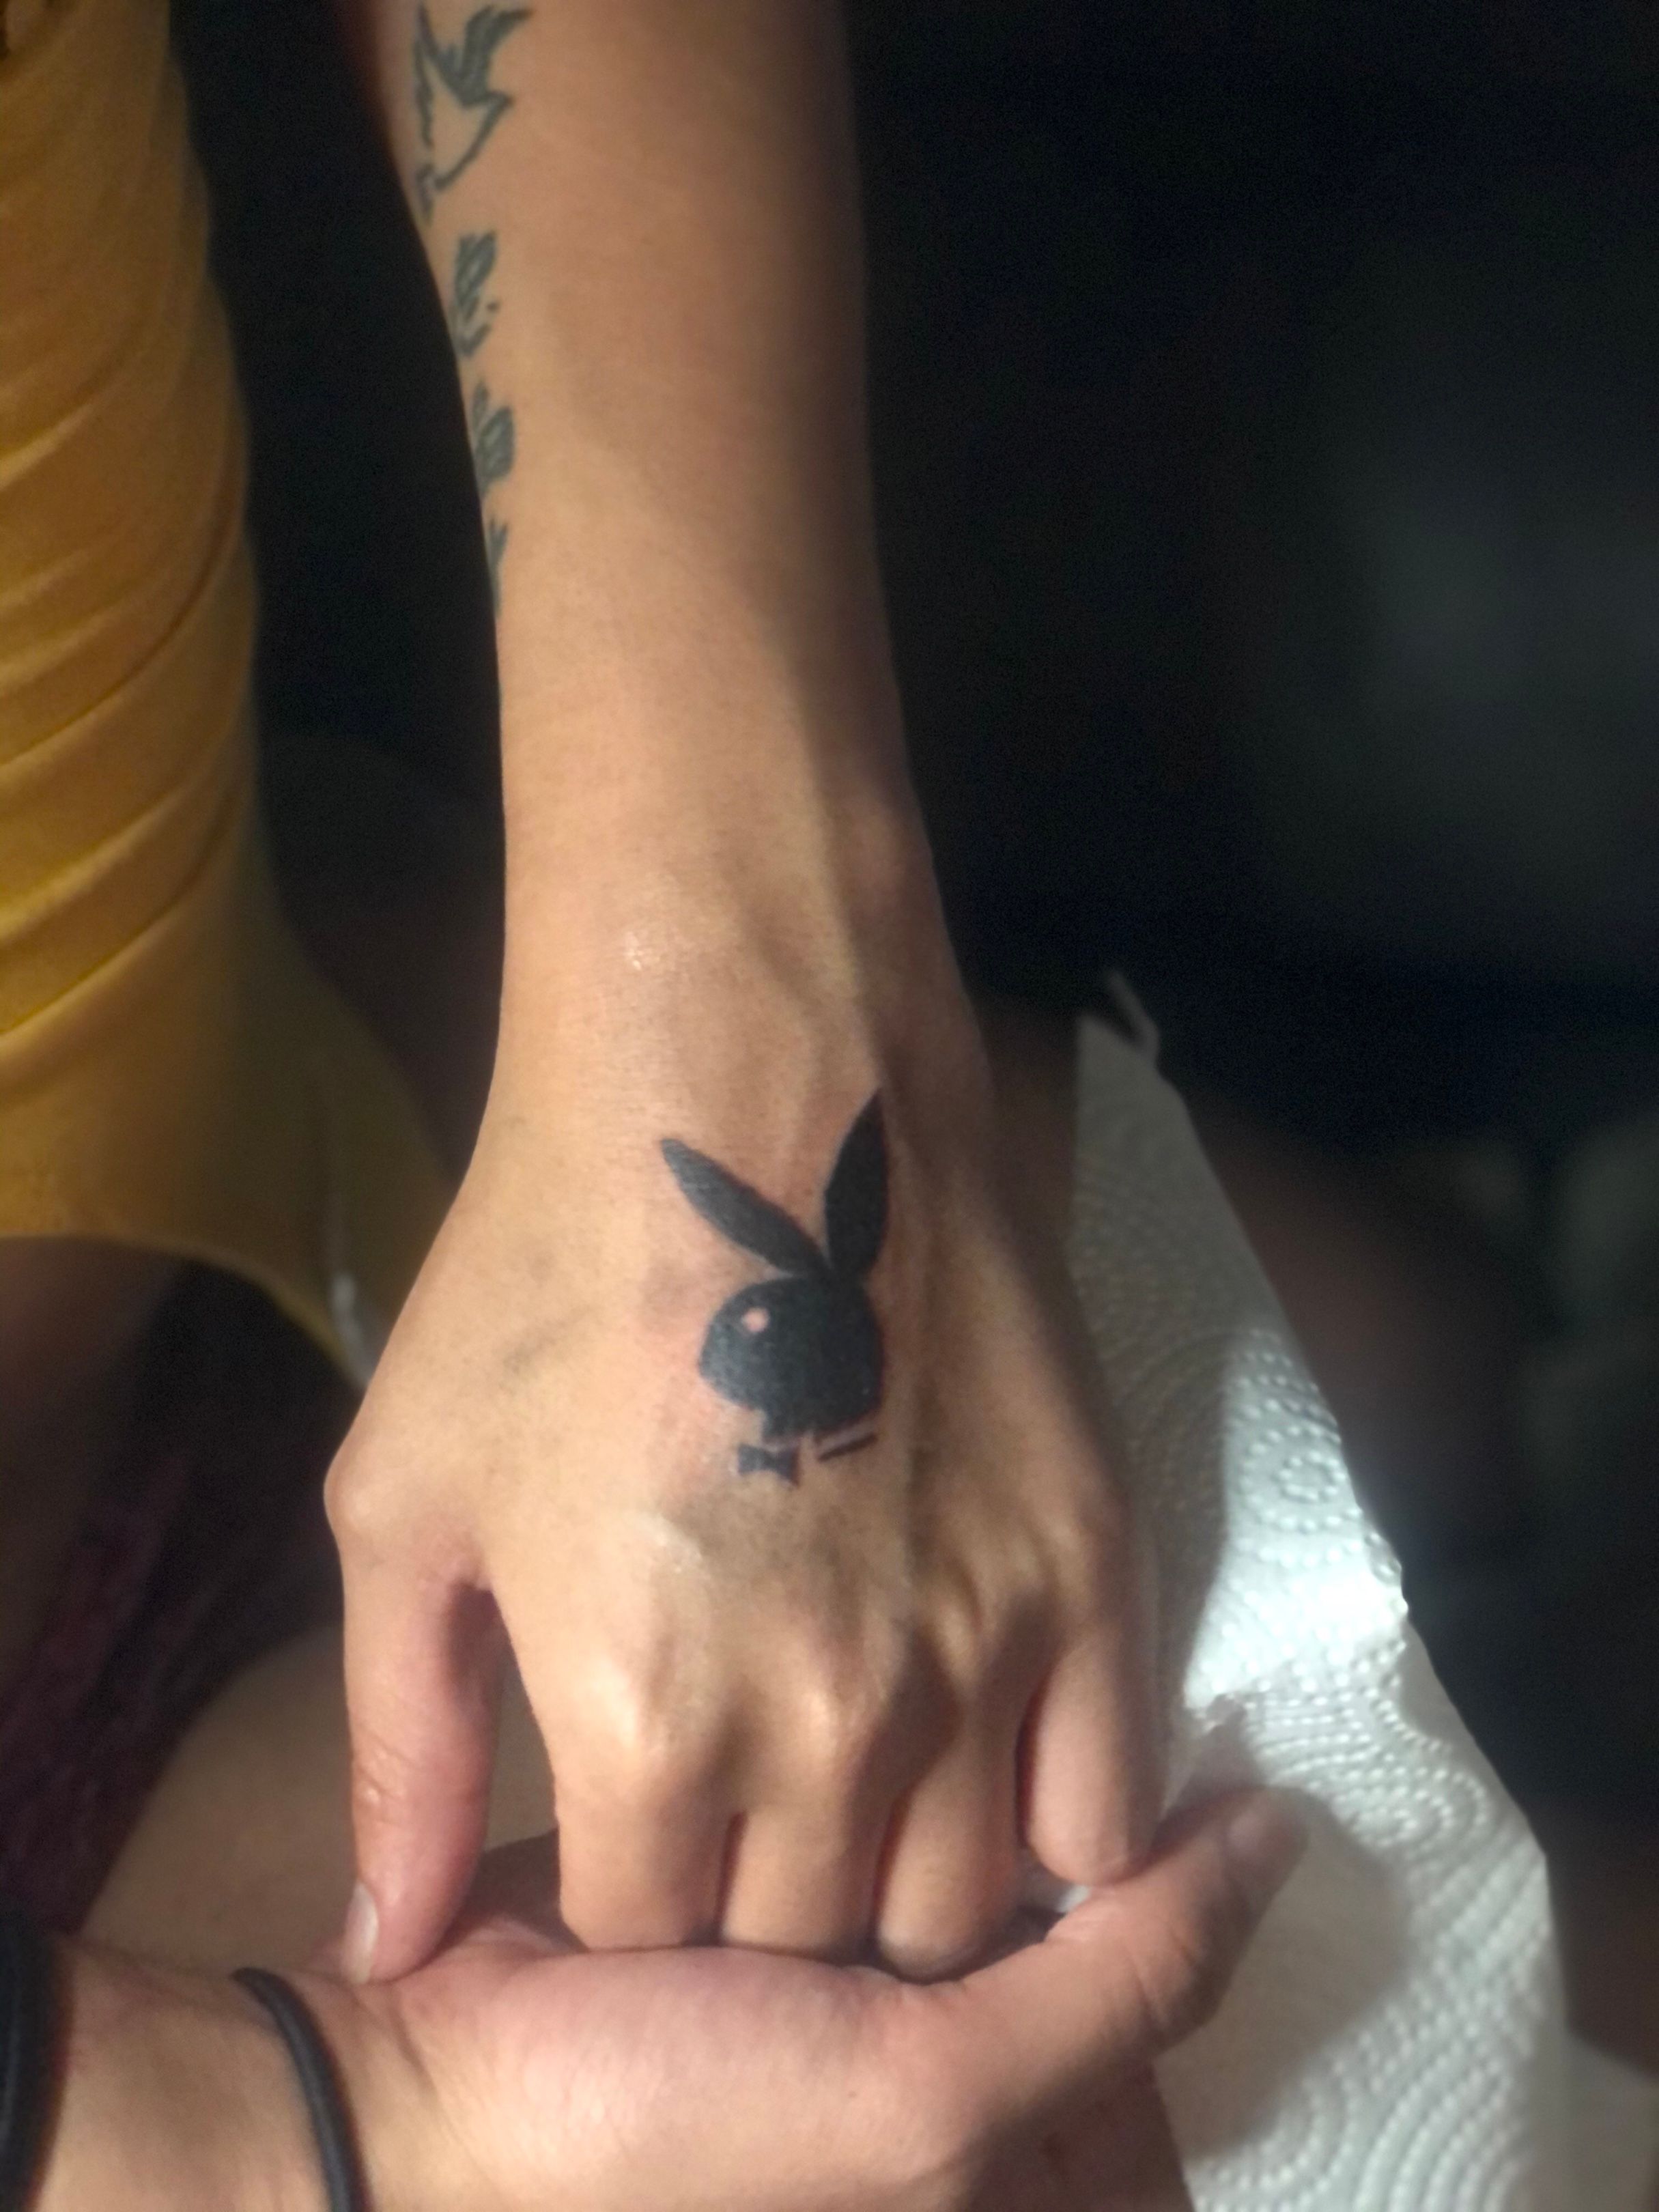 Playboy Bunny Tattoos: Meanings, Designs, and Ideas - TatRing